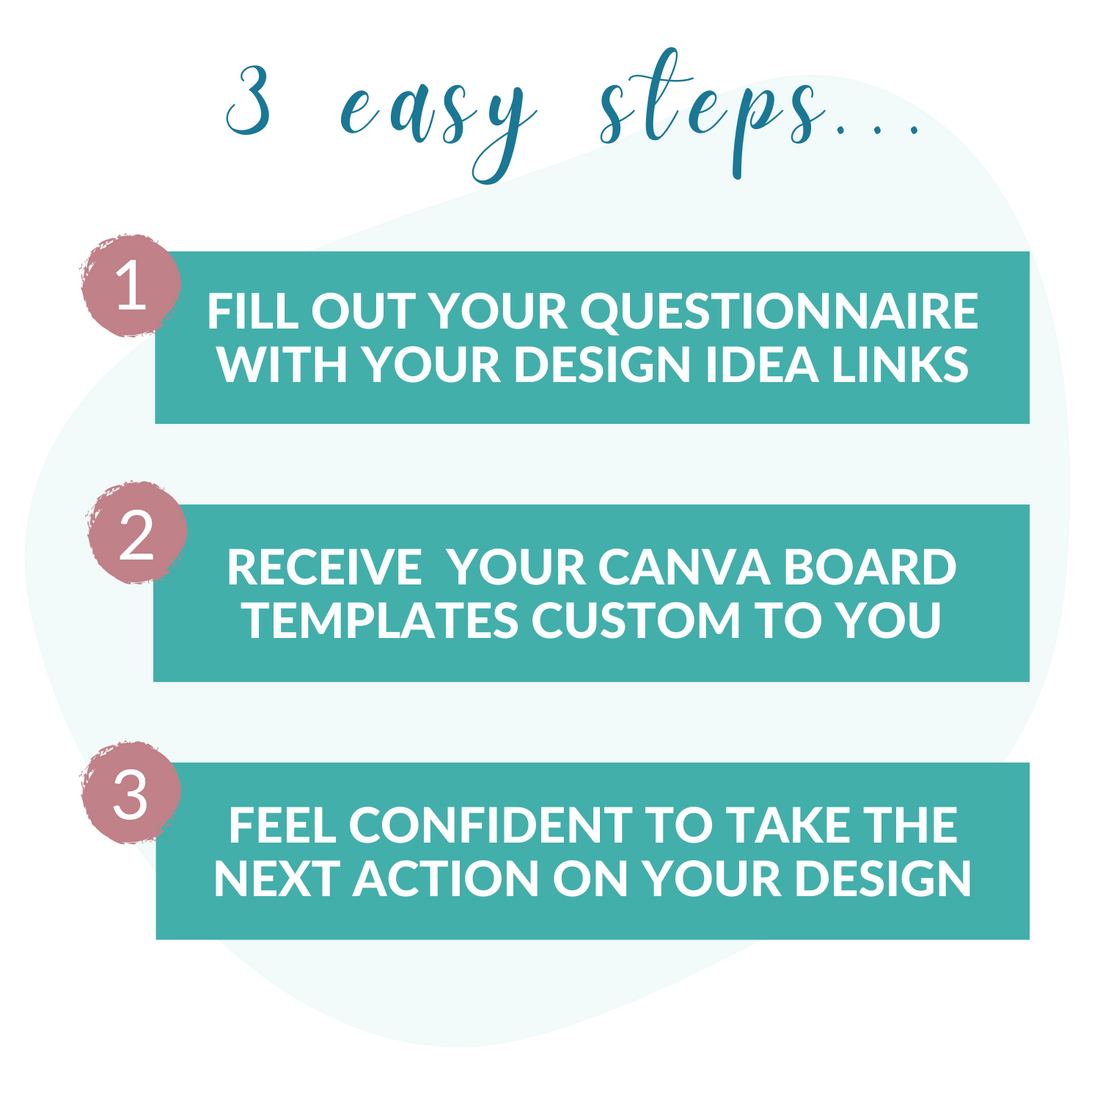 Infographic titled &quot;3 easy steps&quot; showing: 1. Fill out your questionnaire with your design idea links. 2. Receive your My Homier Home&